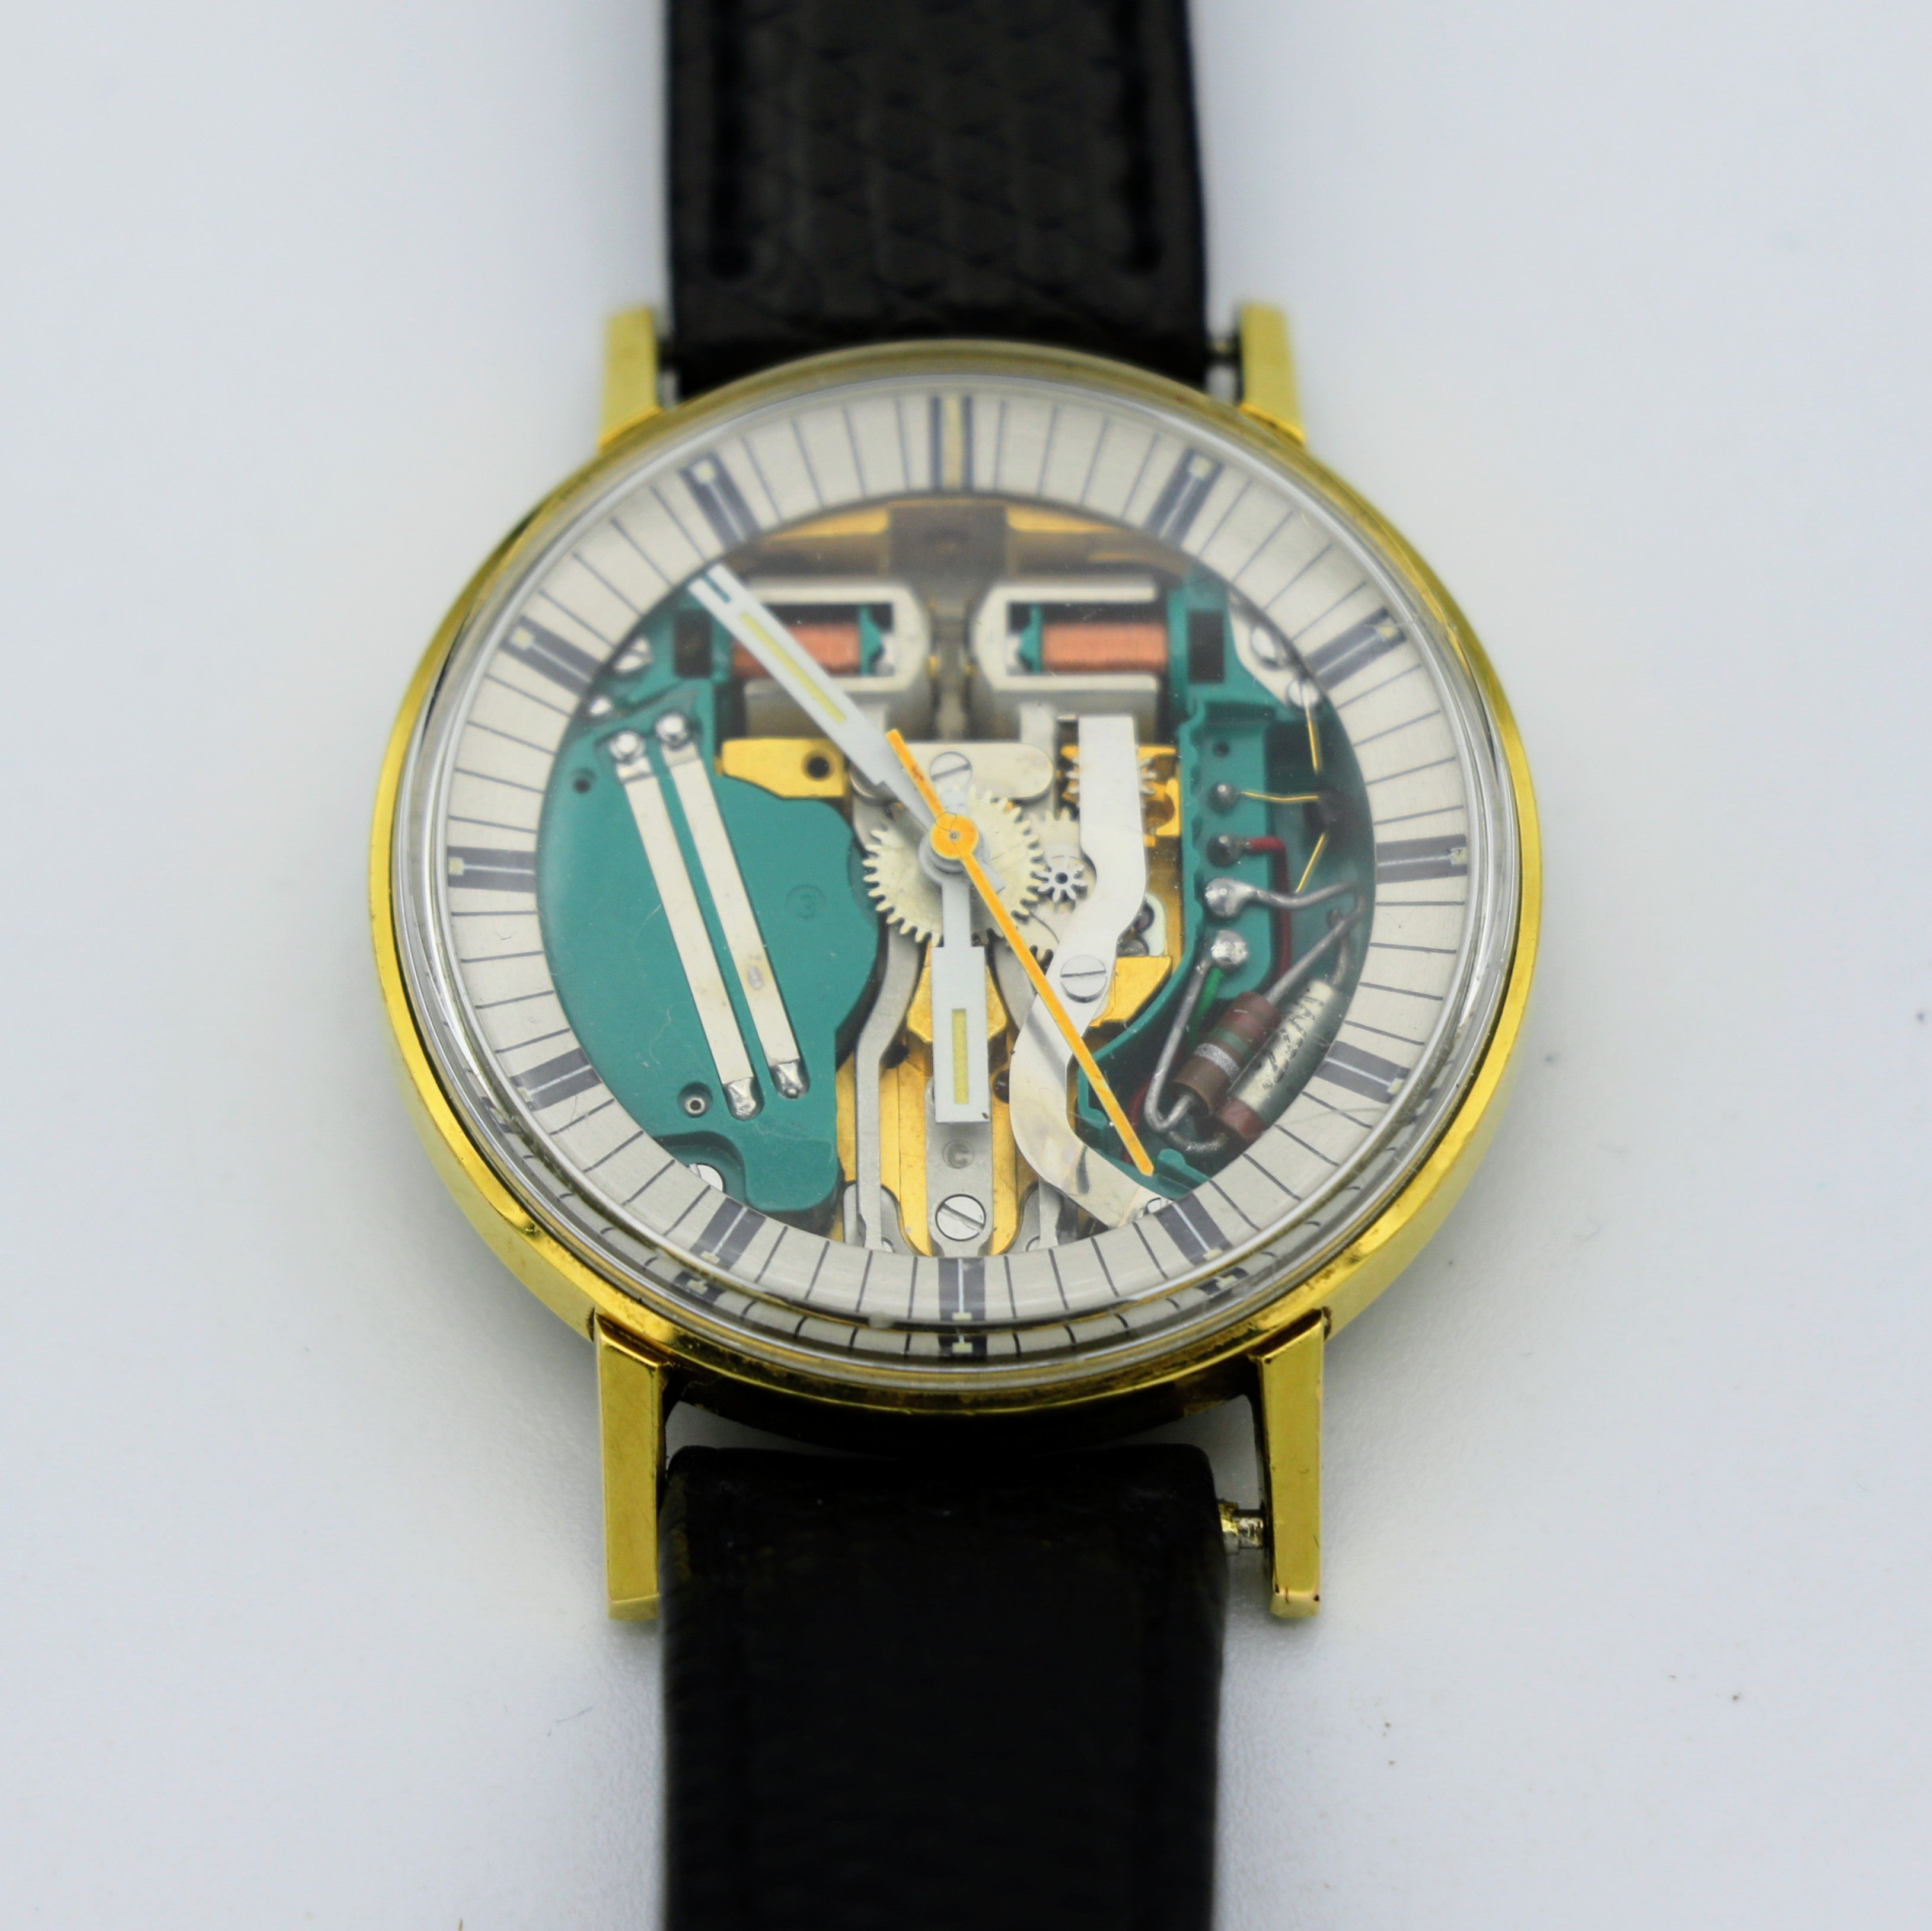 BULOVA Accutron SpaceView Writswatch Electronically Controlled 214 Tuning Fork Watch